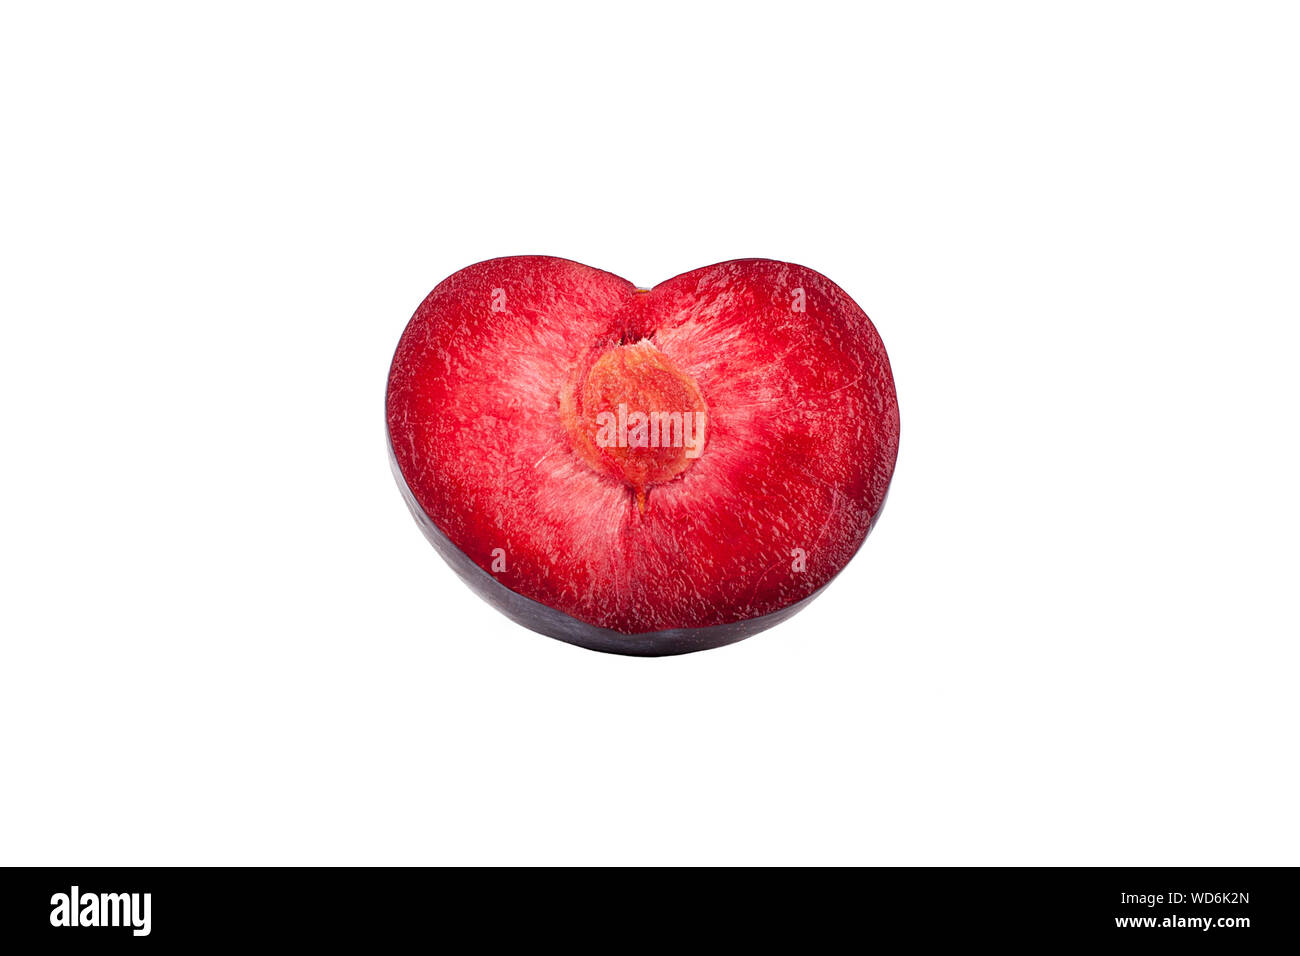 Half plum in the shape of a heart red inside with a stone on a white background isolated close up Stock Photo